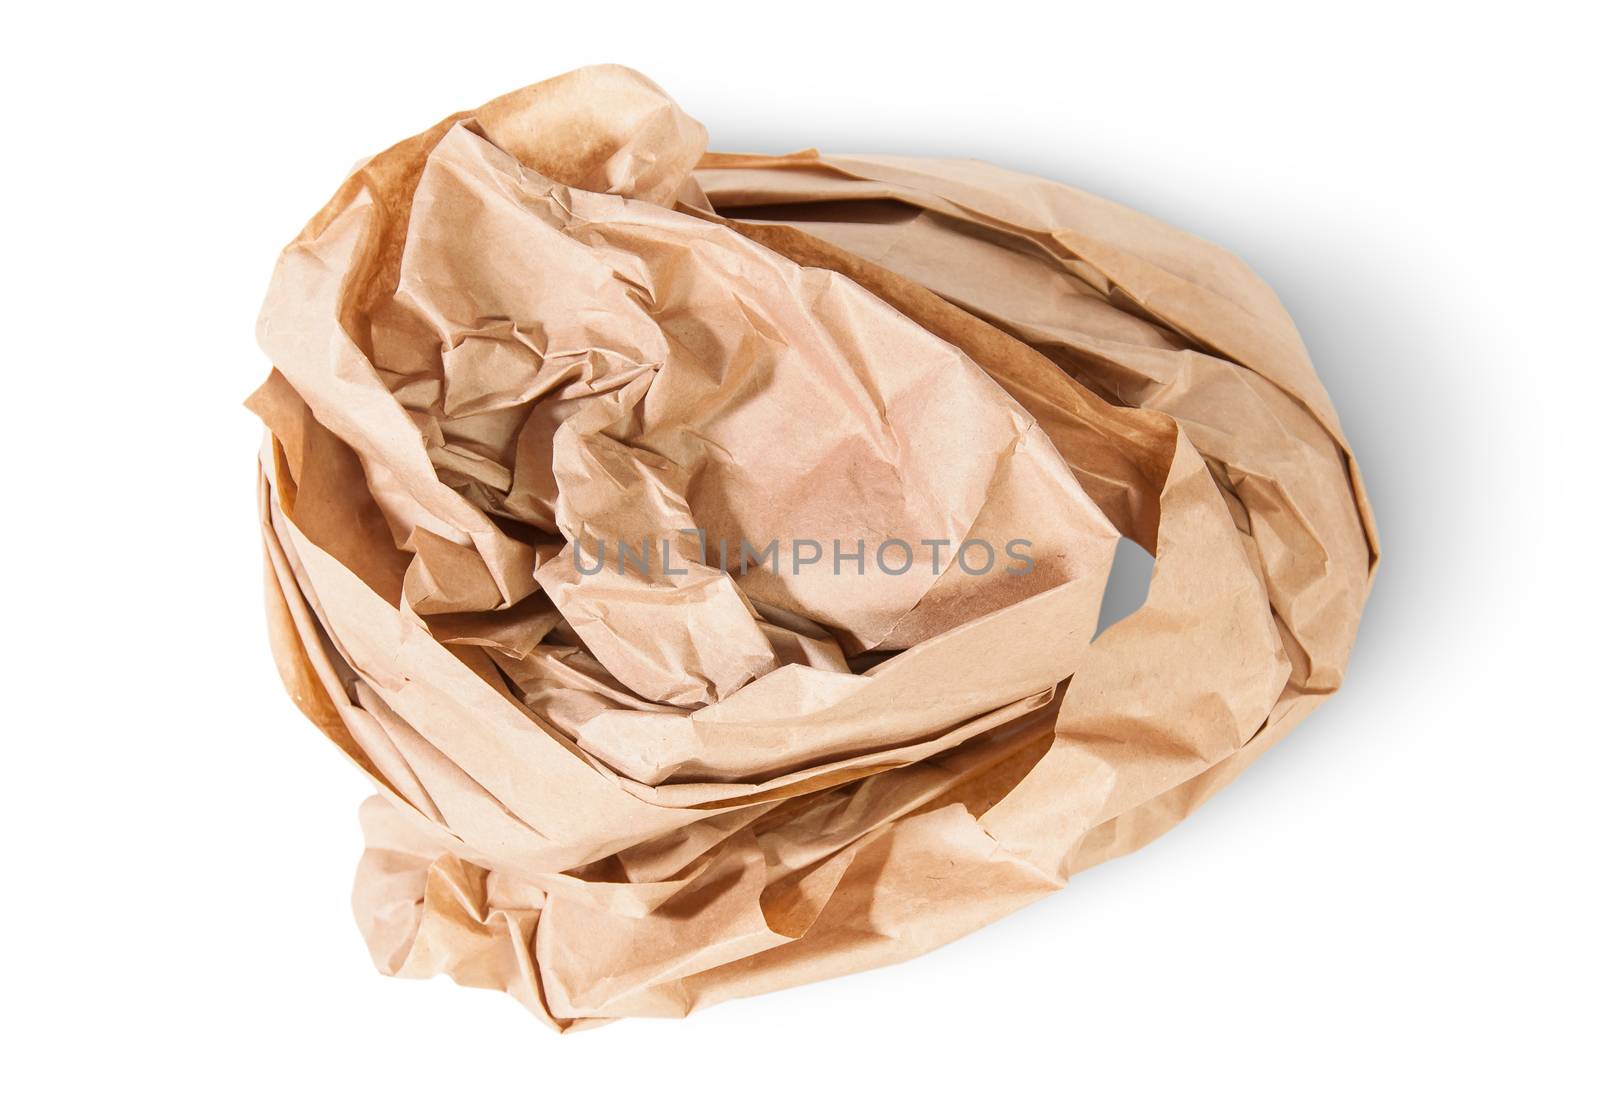 Crumpled Wrapping Paper by Cipariss